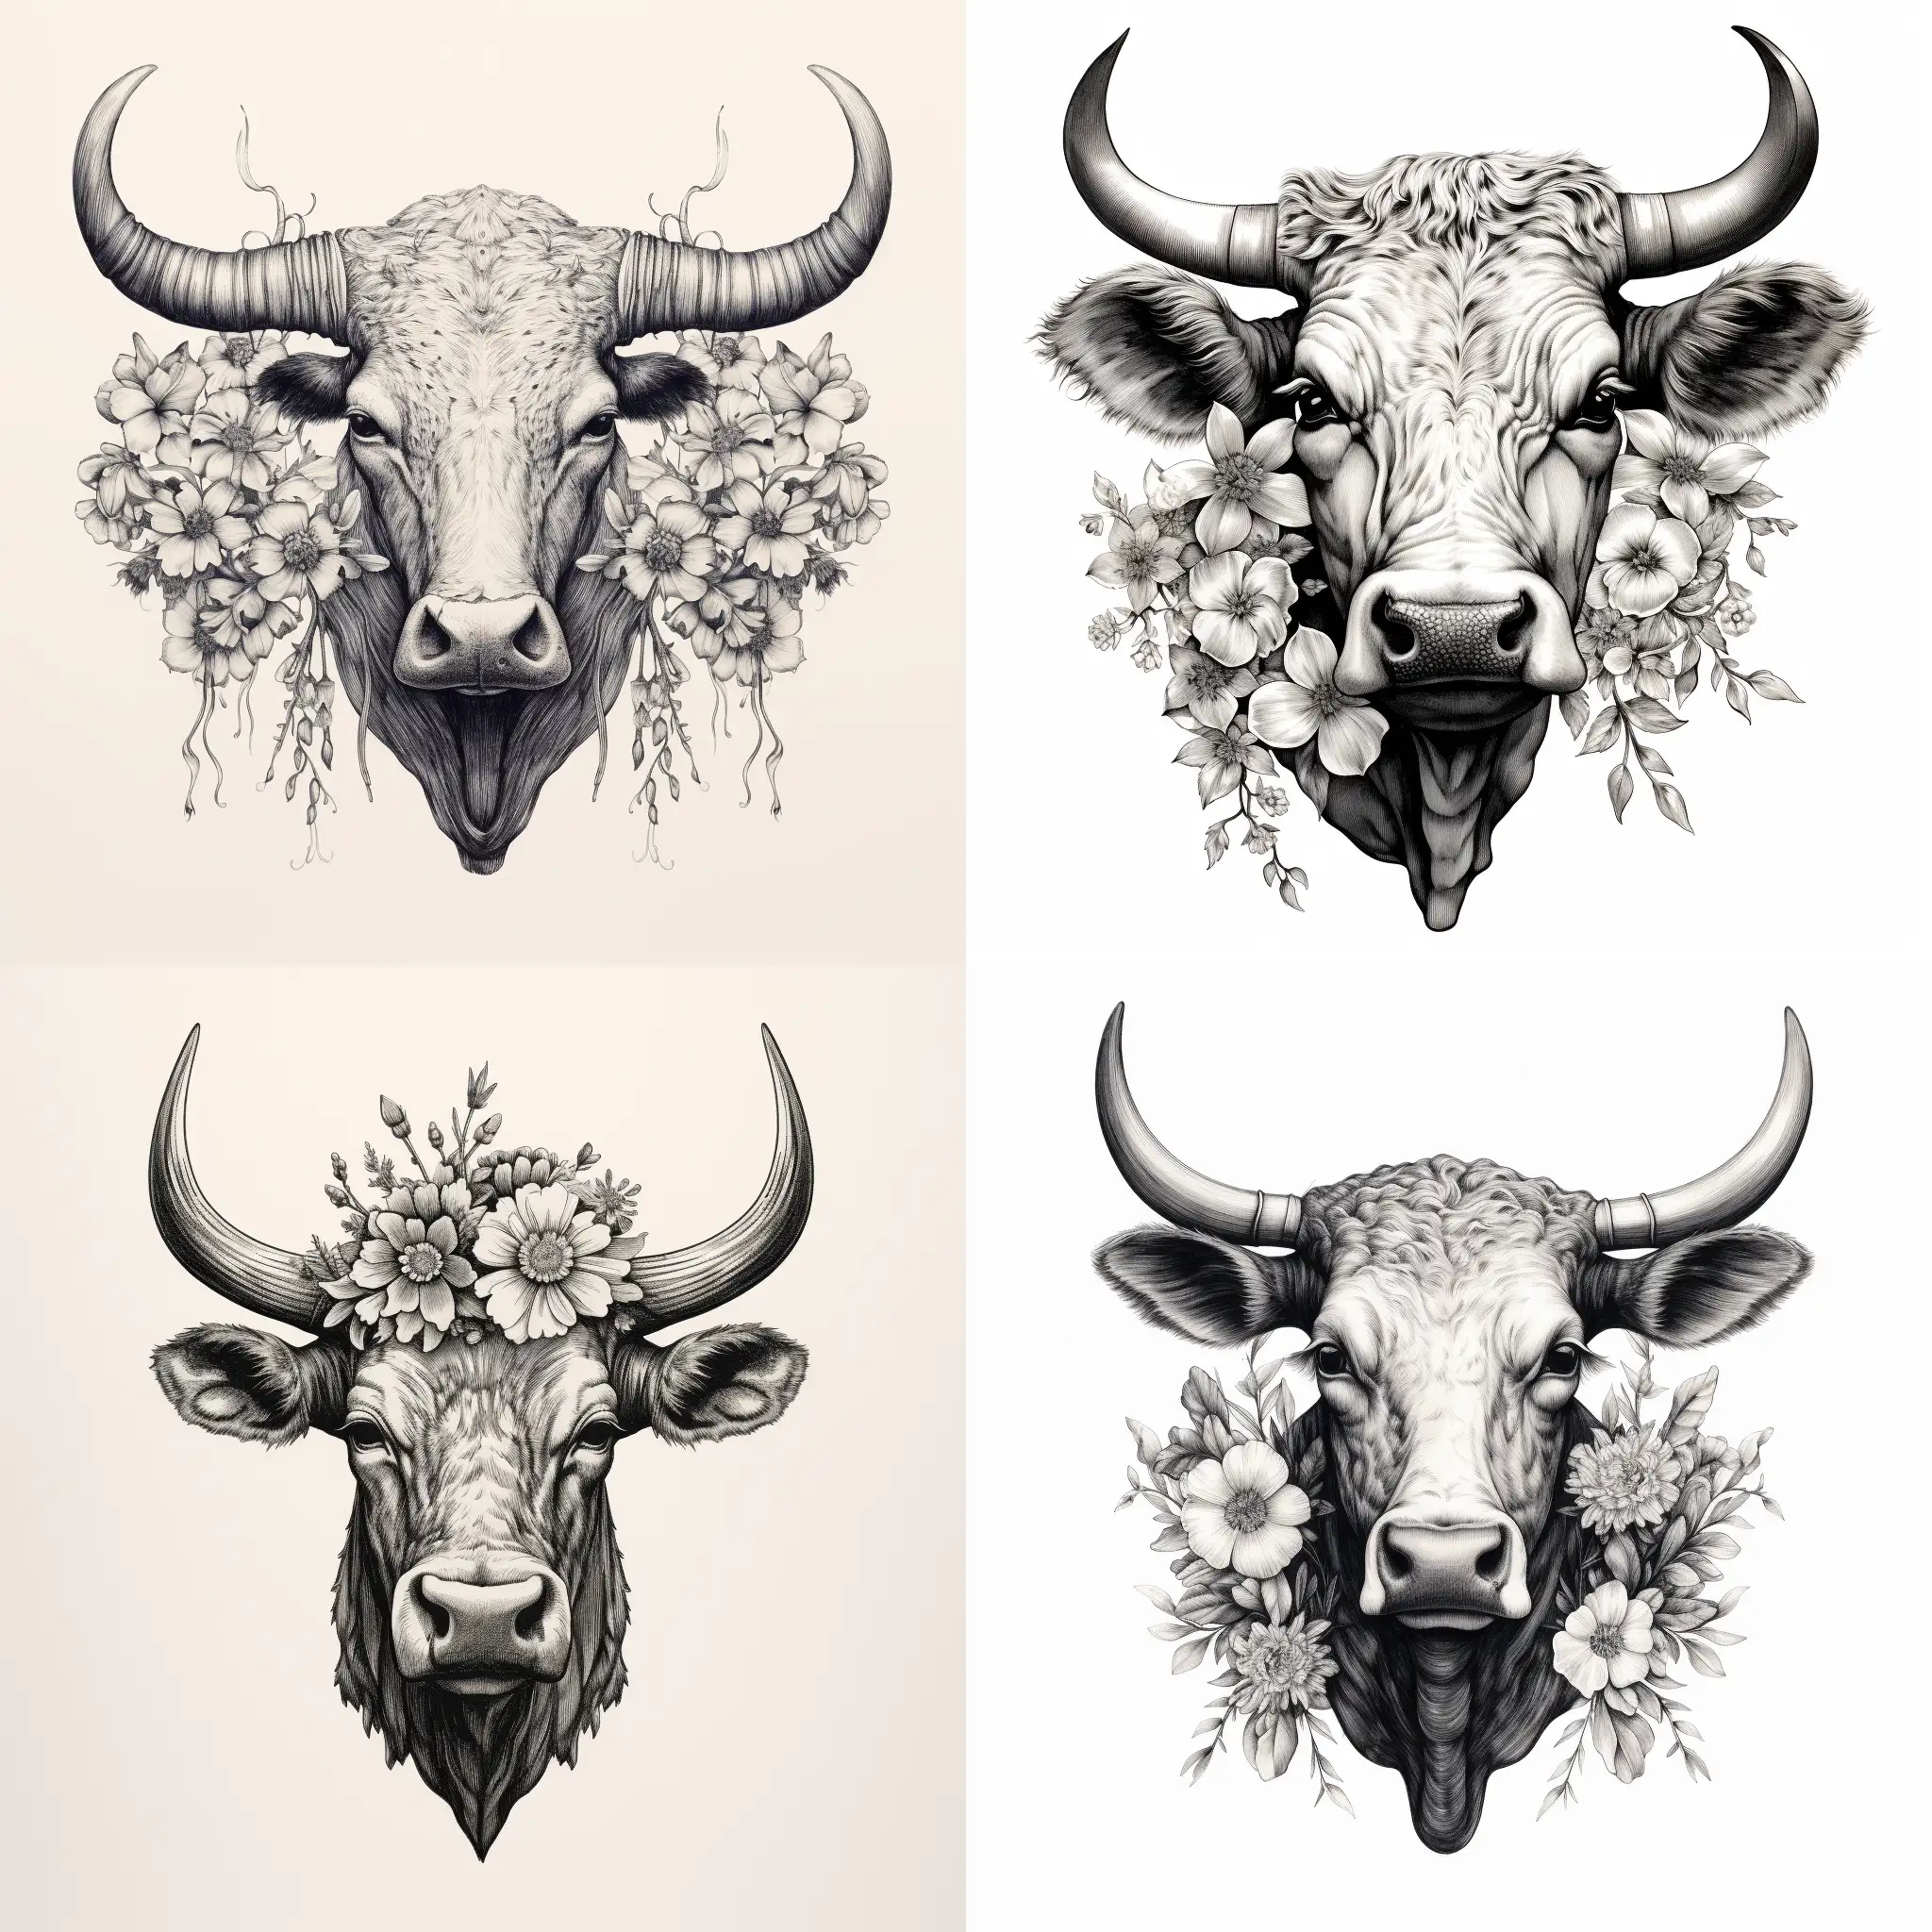 Detailed-Engraving-of-Cows-Head-with-Crown-of-Thorns